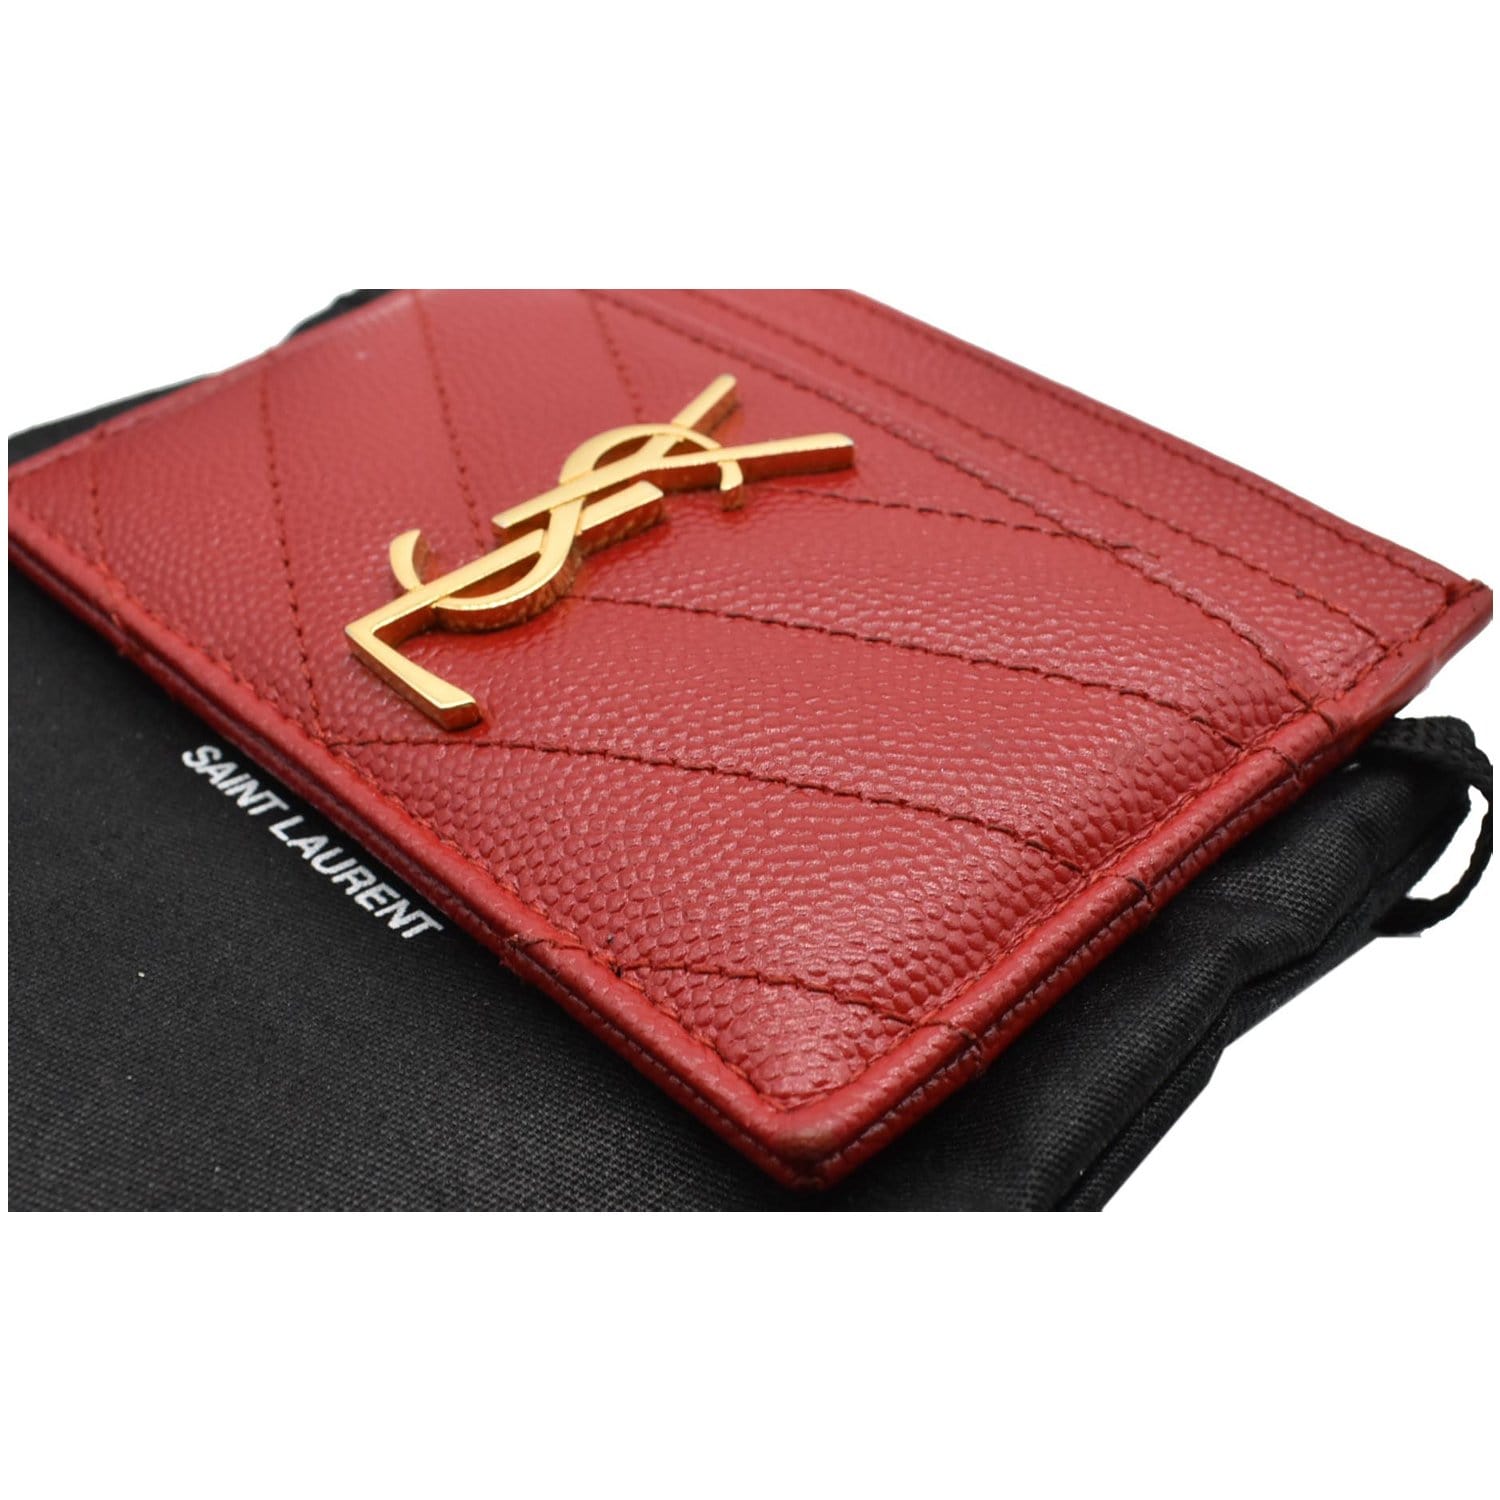 YSL Red Leather Card Holder